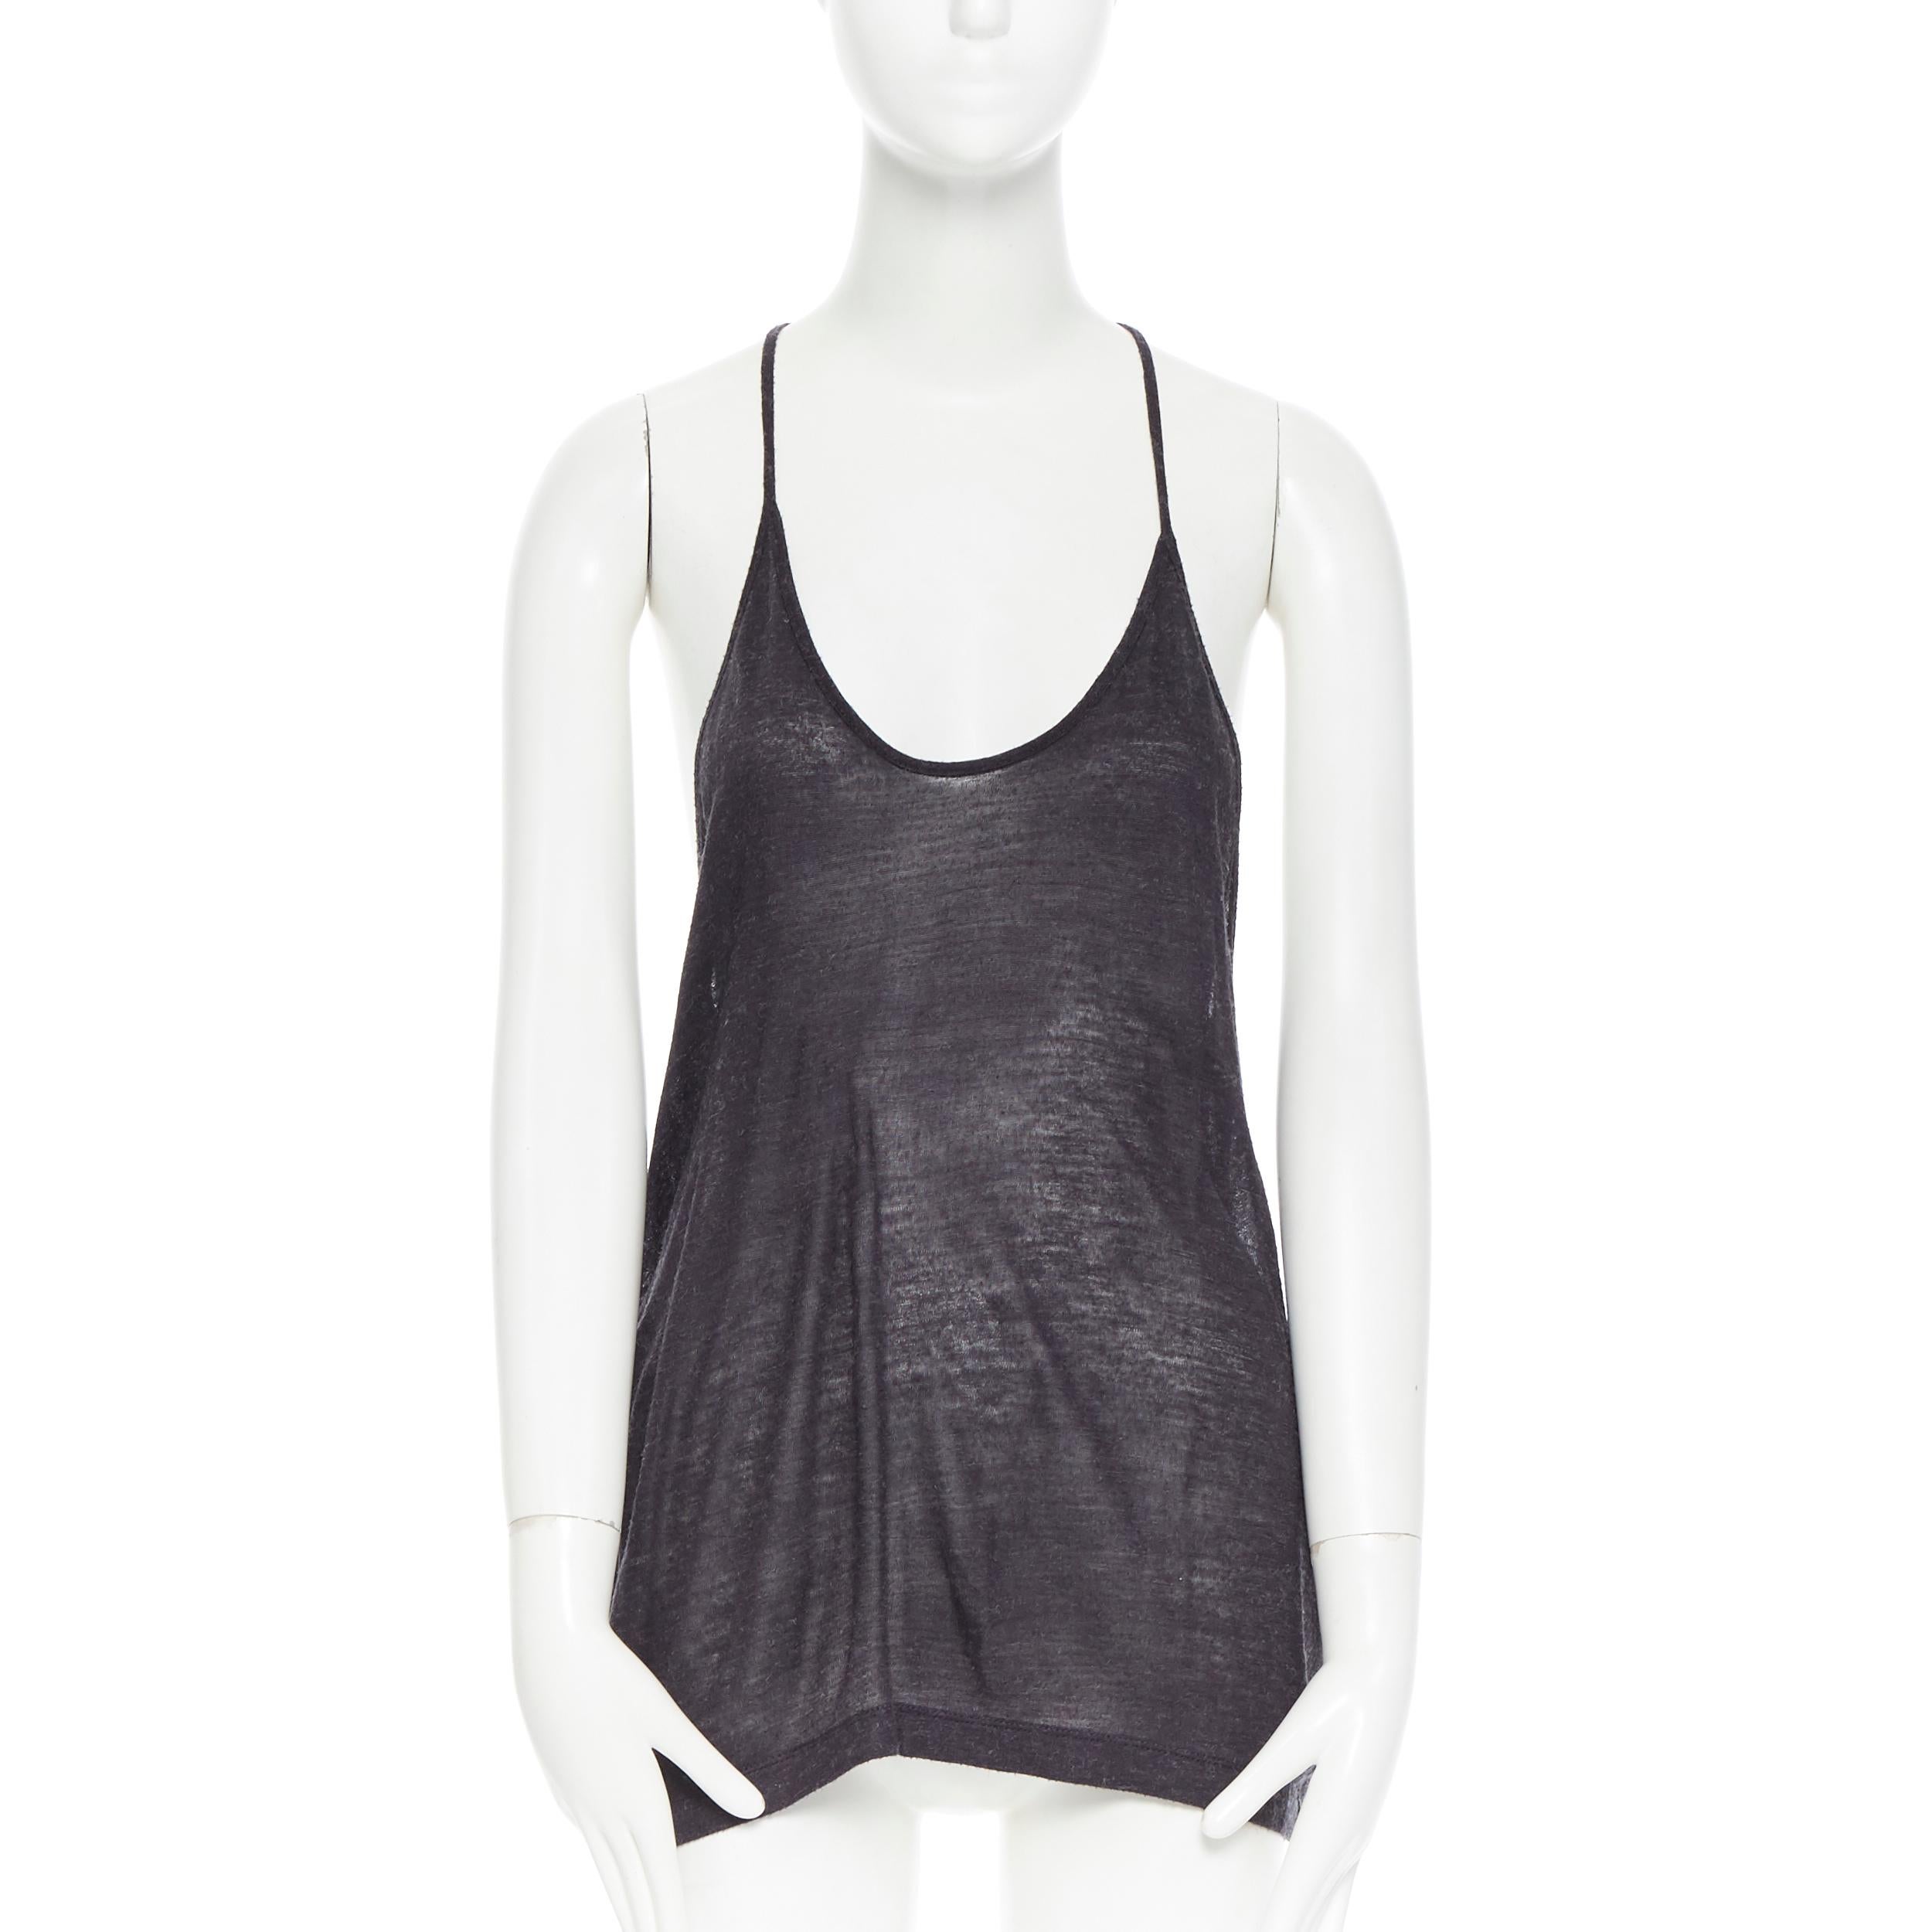 T BY ALEXANDER WANG dark grey acrylic wool scoop neck T-strap tank top XS
Brand: T Alexander Wang
Designer: Alexander Wang
Model Name / Style: T-strap tank top
Material: Acrylic, wool
Color: Grey
Pattern: Solid
Extra Detail: Sleeveless. Spaghetti